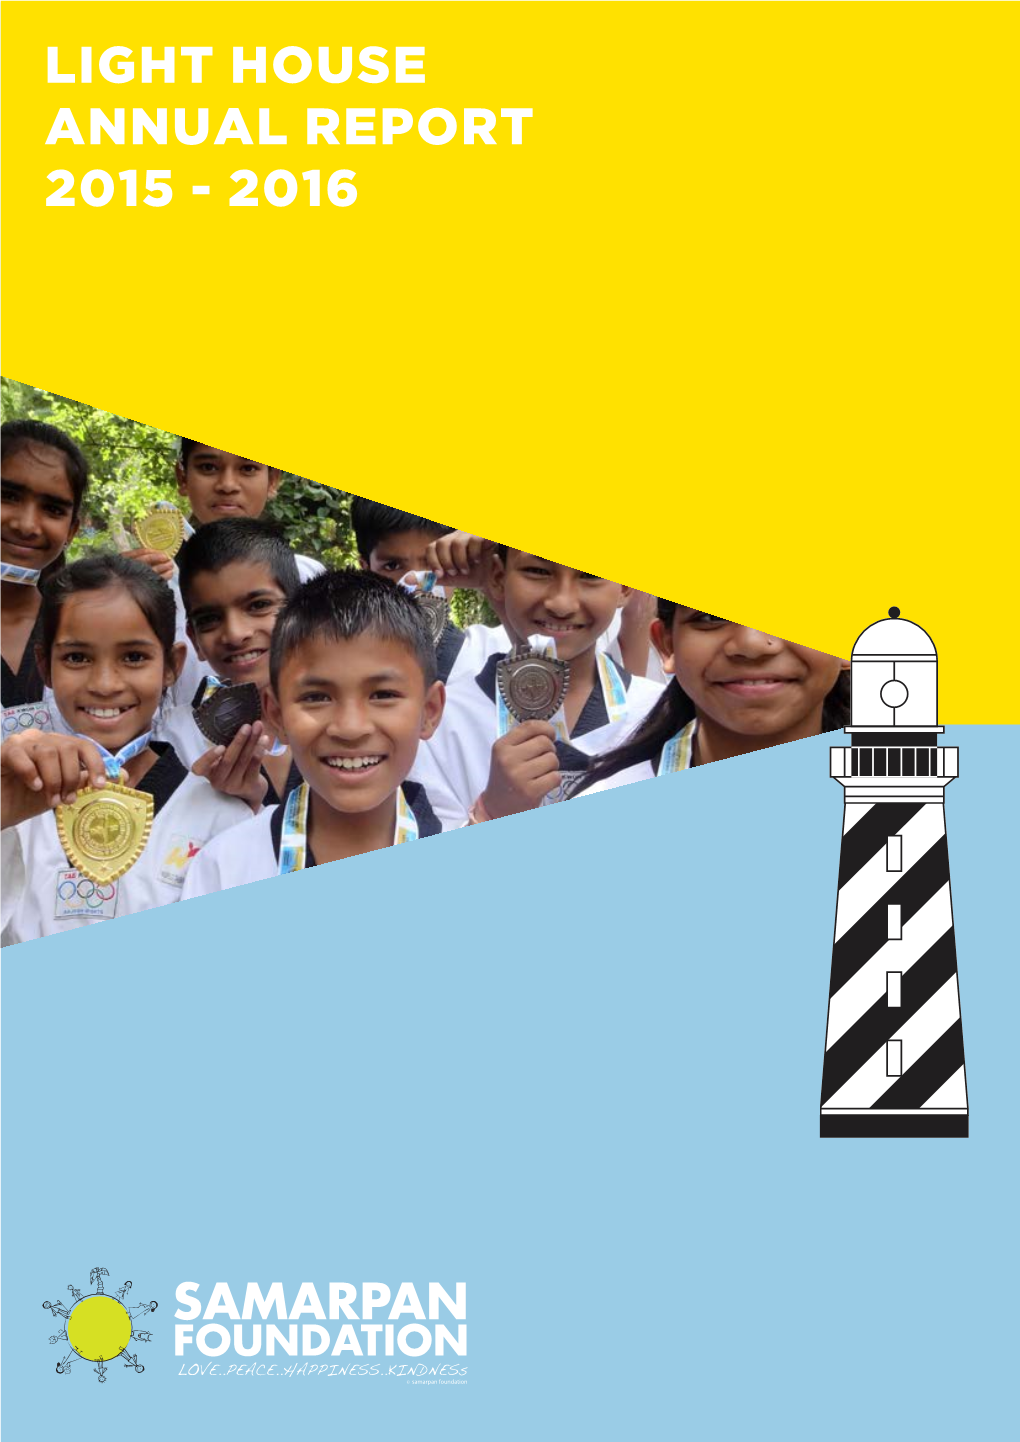 Light House Annual Report 2015 - 2016